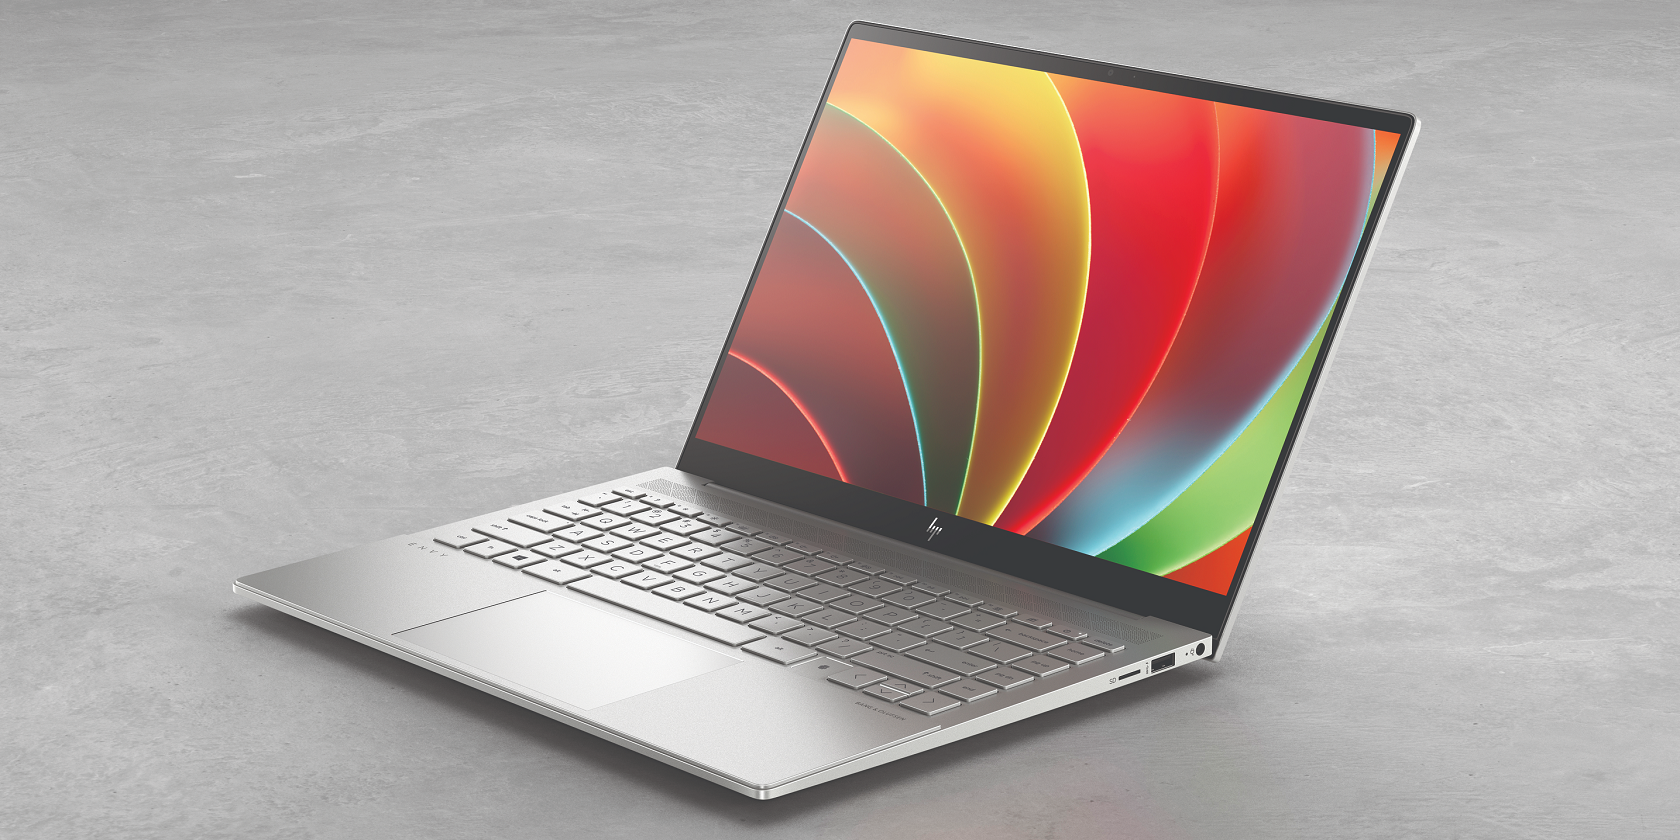 New HP Laptops at CES 2021: Refreshed Envy 14 Released